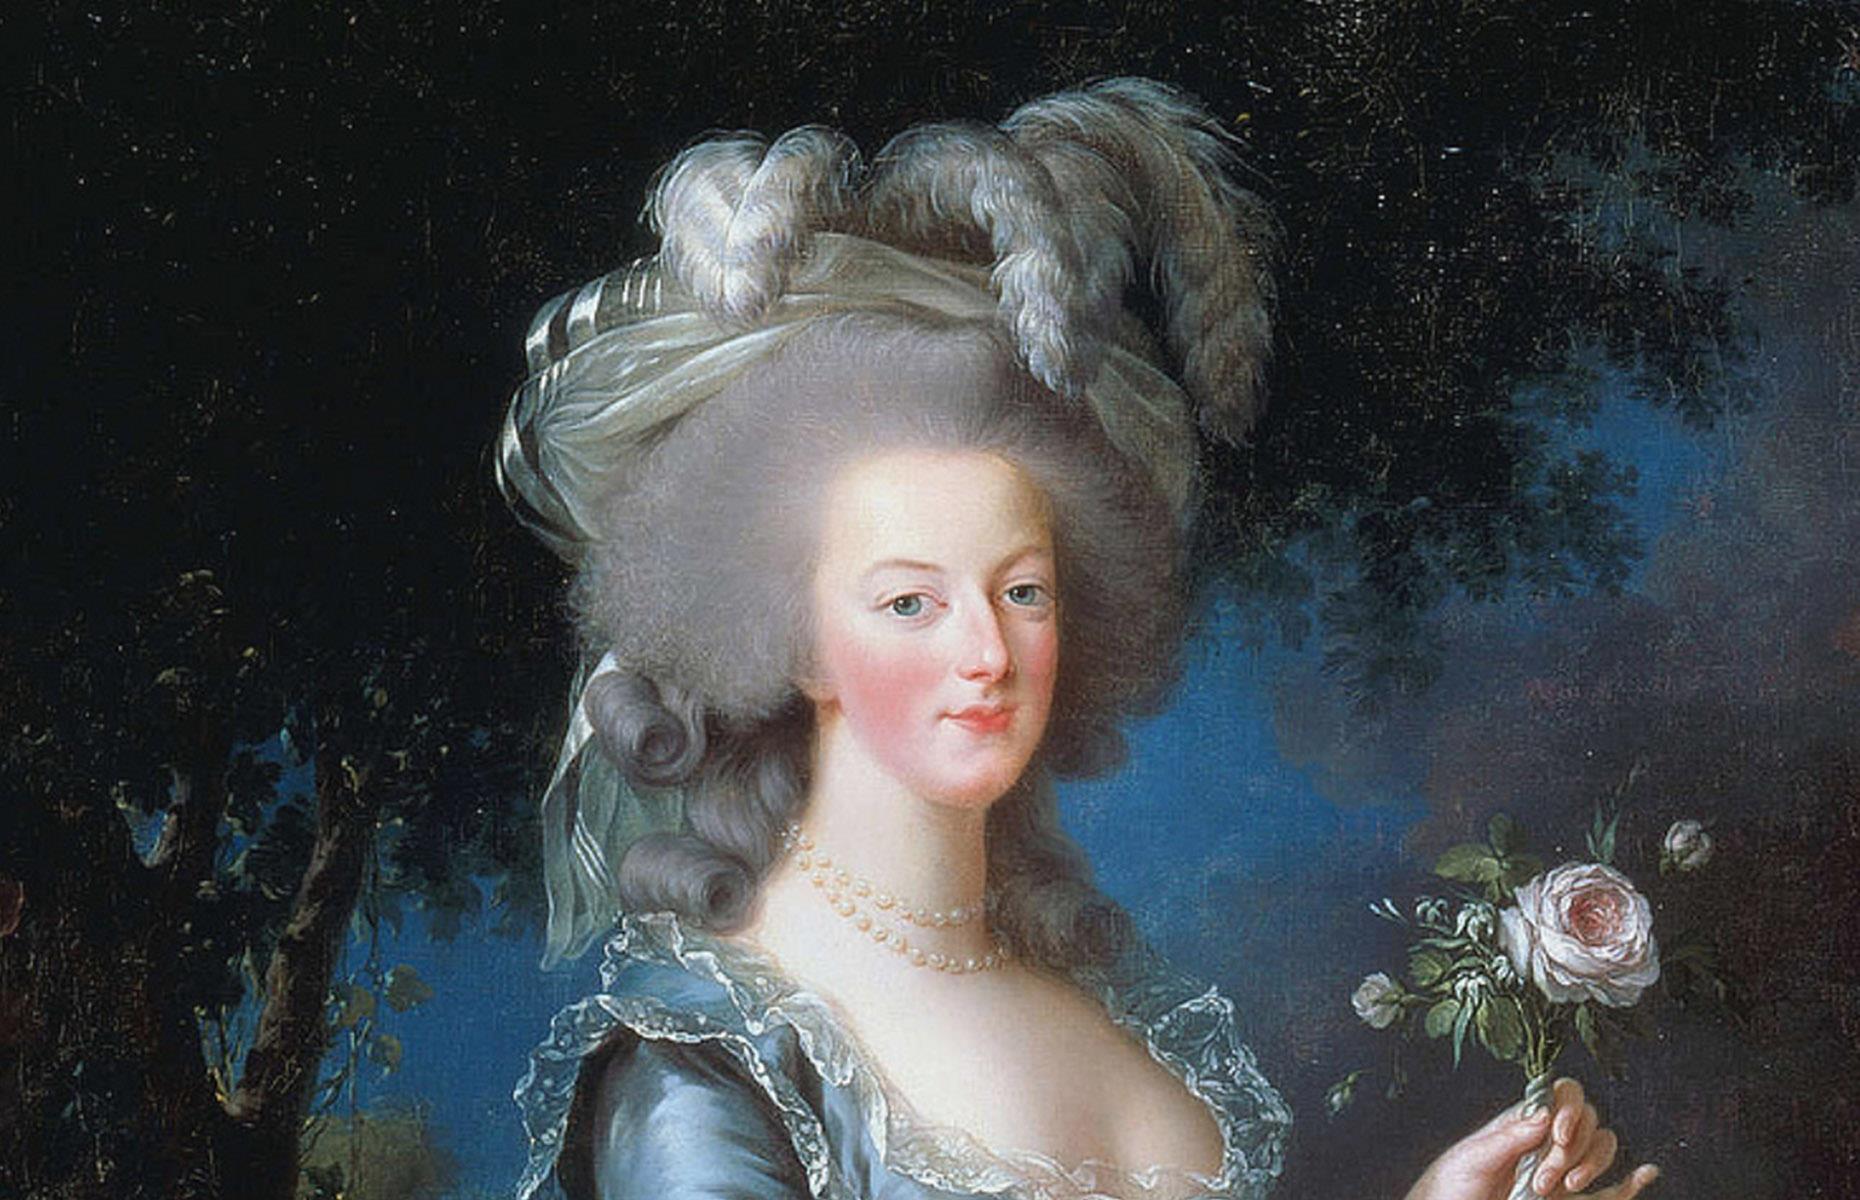 <p>Marie Antoinette is as renowned today for her life of luxury as she was when she reigned as the Queen of France over 200 years ago.</p>  <p>But her unrestrained opulence marked a stark contrast between the monarchy and the financial struggles faced by ordinary French people in the late 18th century. This disconnect played a pivotal role in the French Revolution, ultimately leading to her brutal downfall.</p>  <p><strong>Read on to take a look inside the lavish life of the so-called "Madame Déficit" and find out how her out-of-control spending led to her grisly demise in 1793. </strong>All dollar amounts in US dollars.</p>